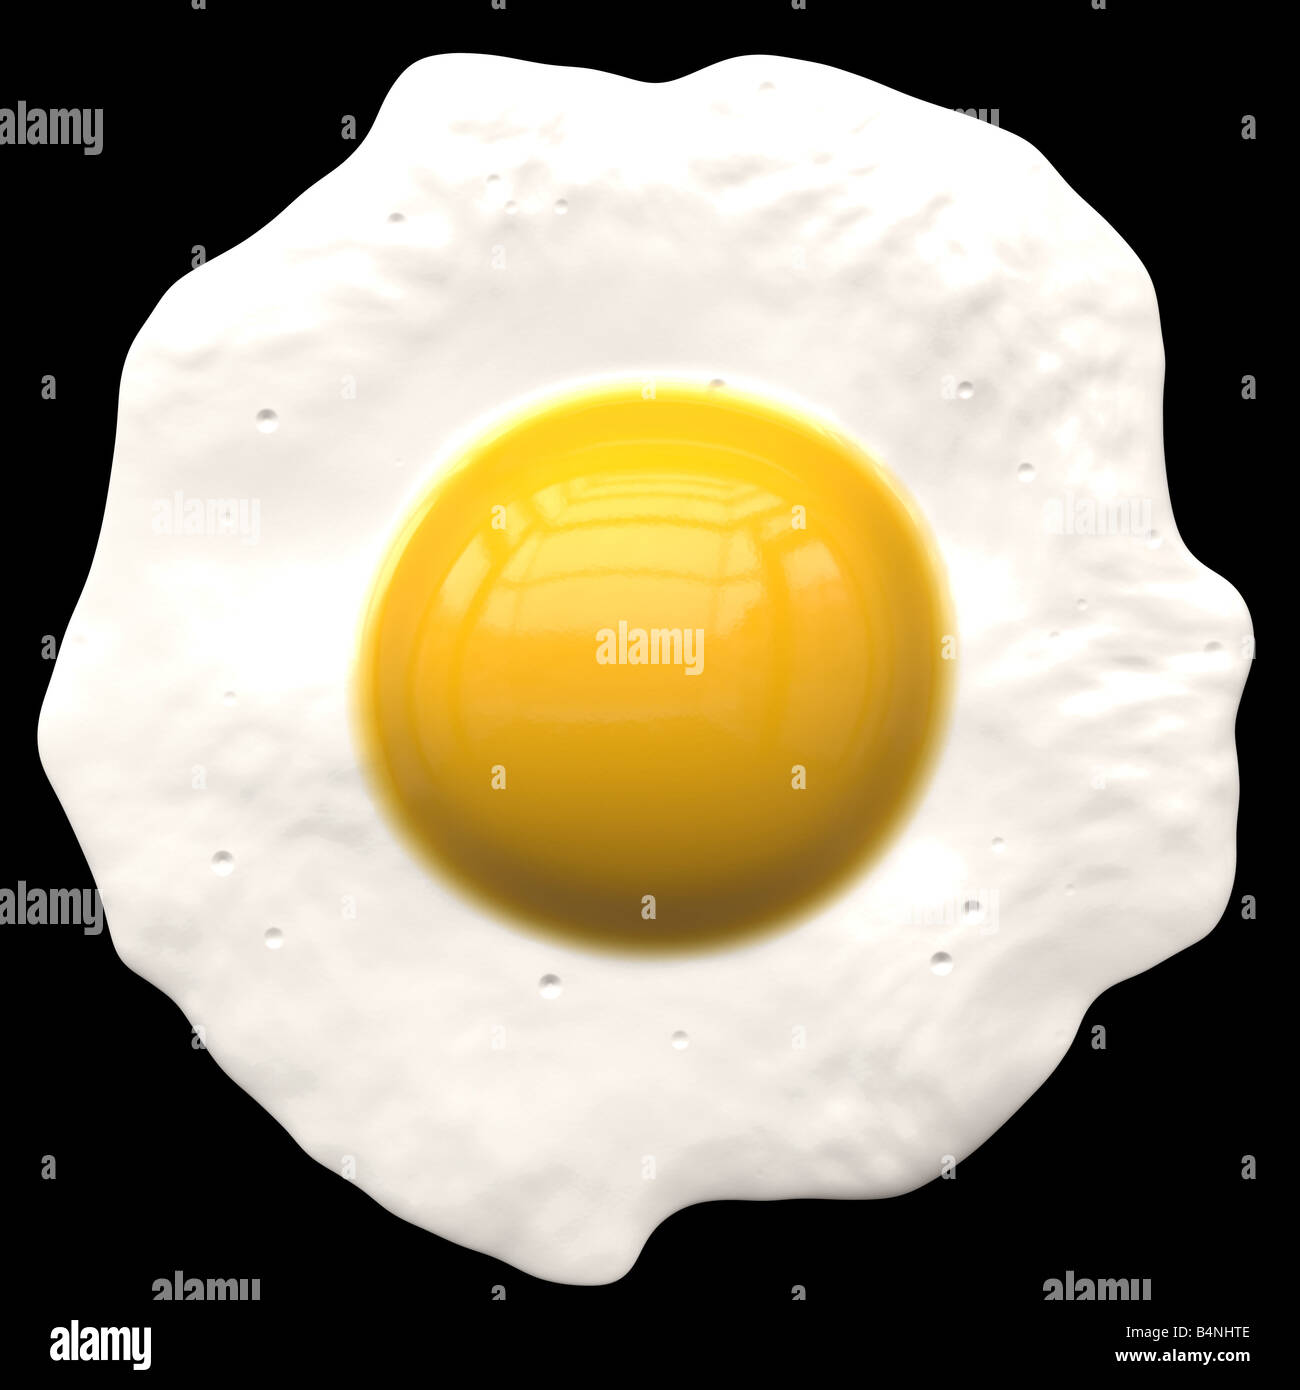 A fried egg illustration isolated over black Stock Photo